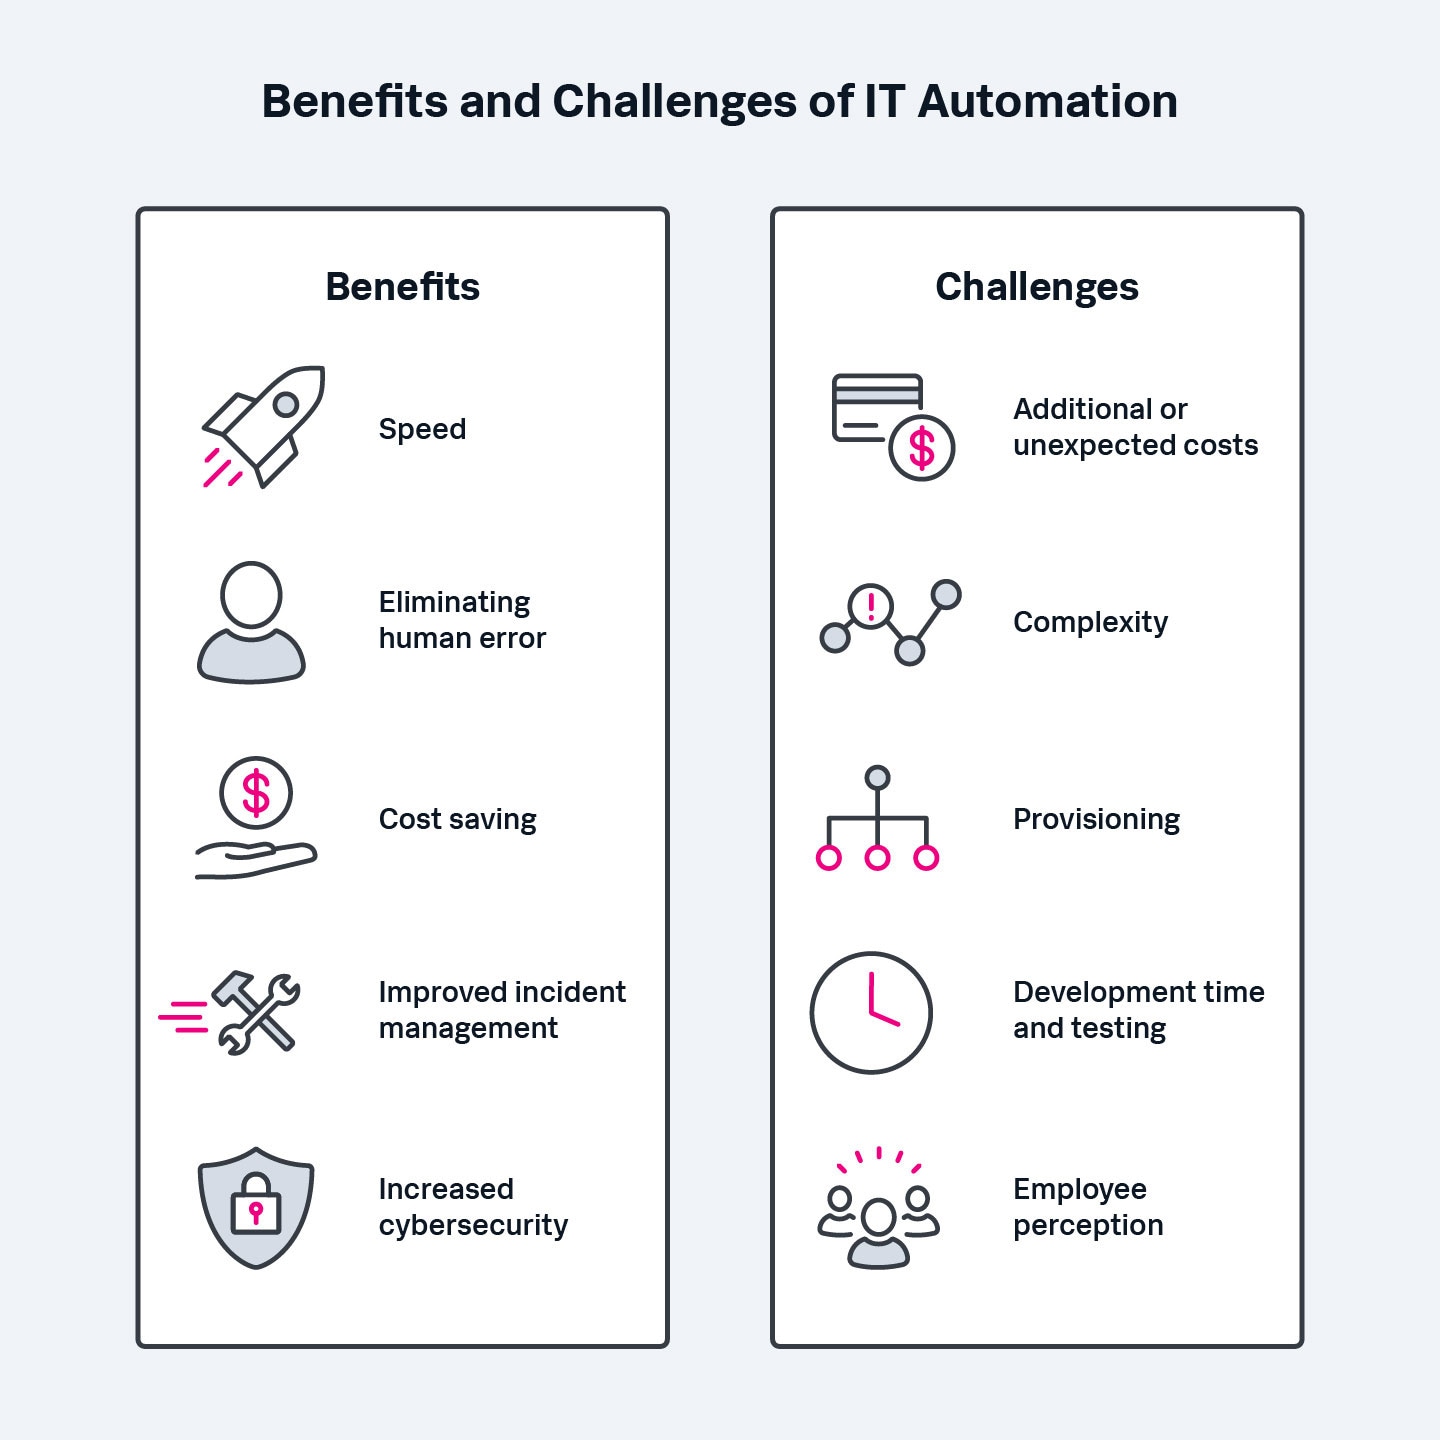 A simple list of benefits and challenges of IT automation